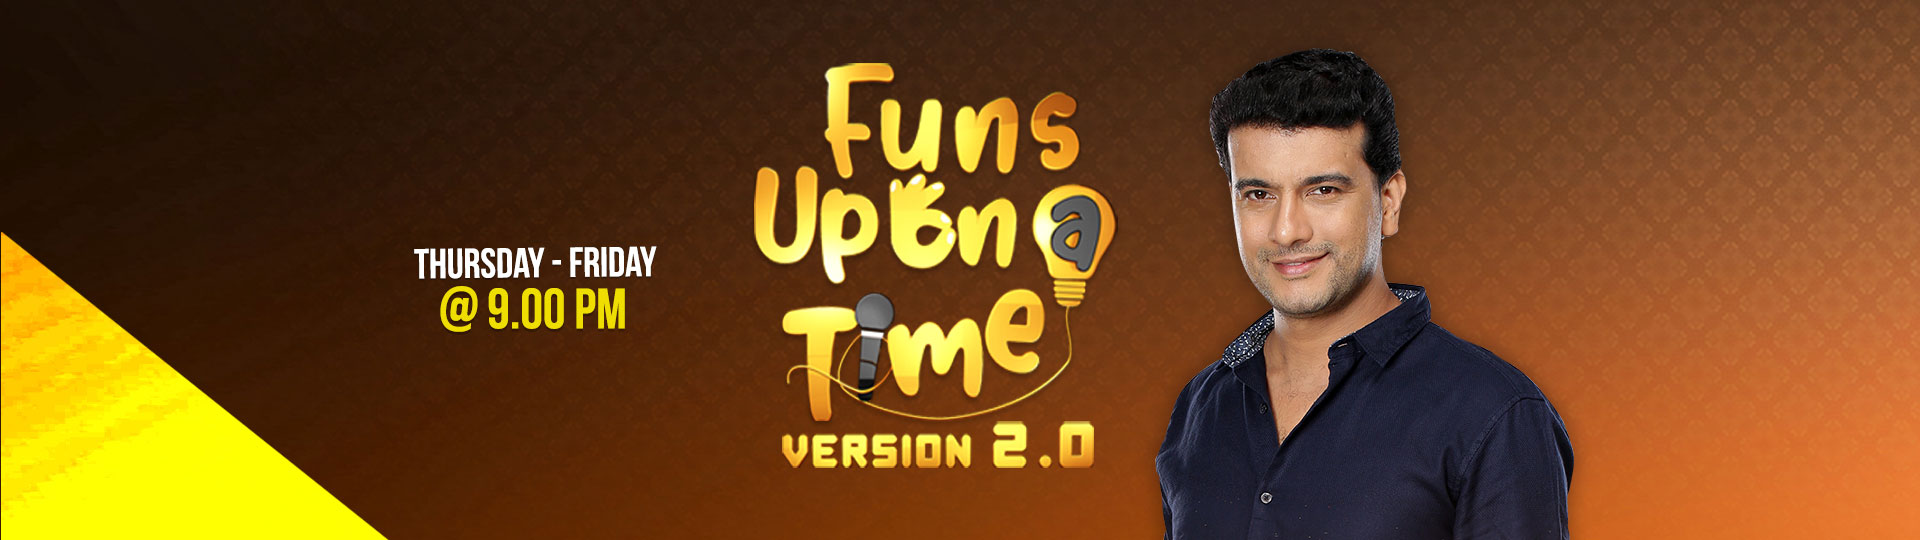 Funs upon a time 2- Banner